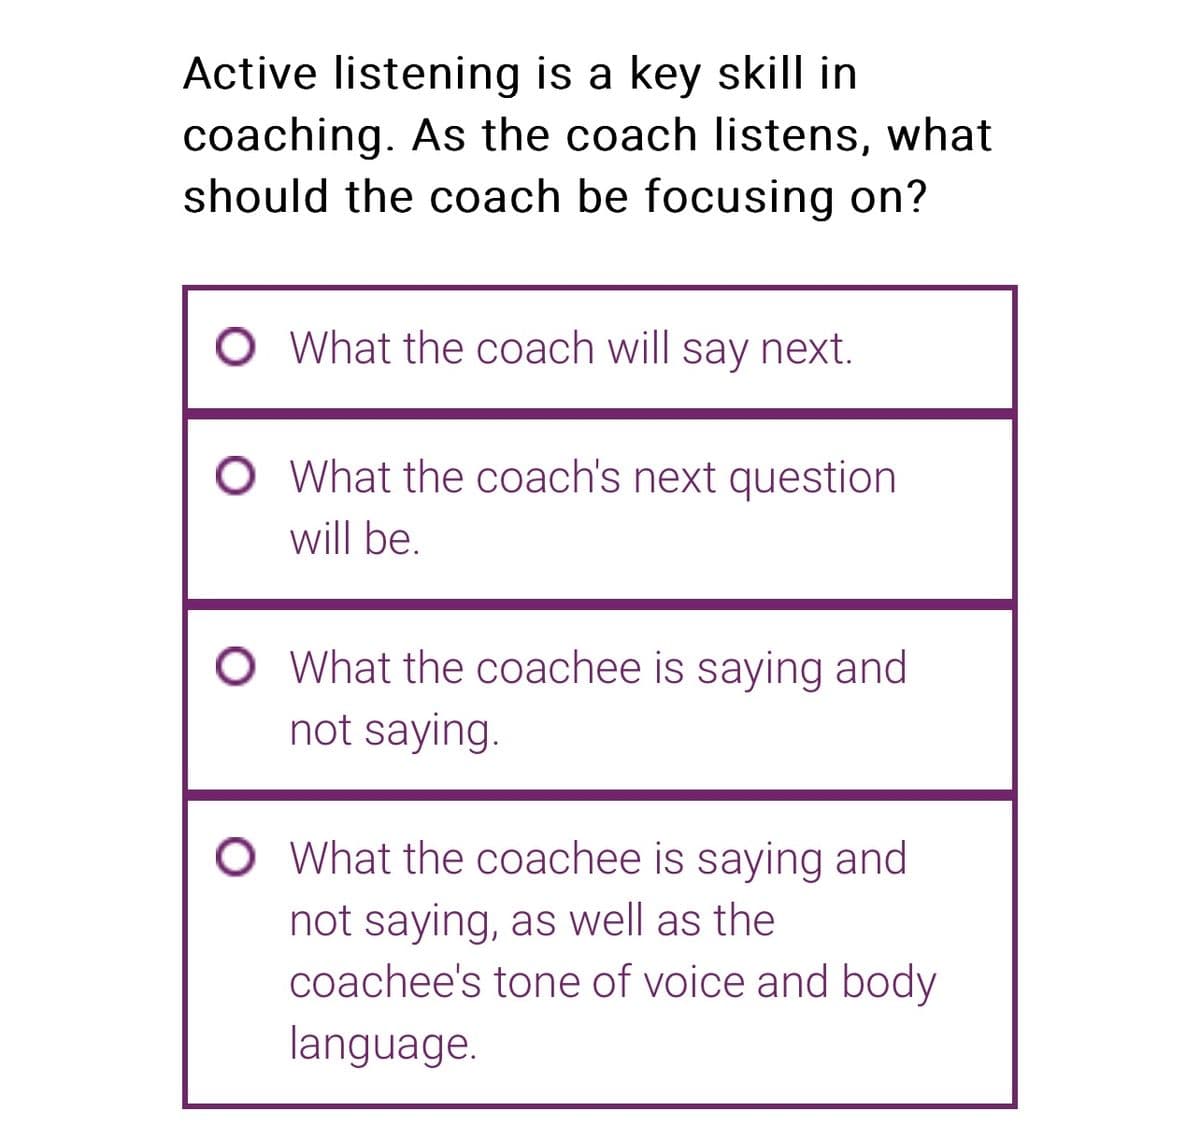 Active listening is a key skill in
coaching. As the coach listens, what
should the coach be focusing on?
O What the coach will say next.
What the coach's next question
will be.
O What the coachee is saying and
not saying.
O What the coachee is saying and
not saying, as well as the
coachee's tone of voice and body
language.